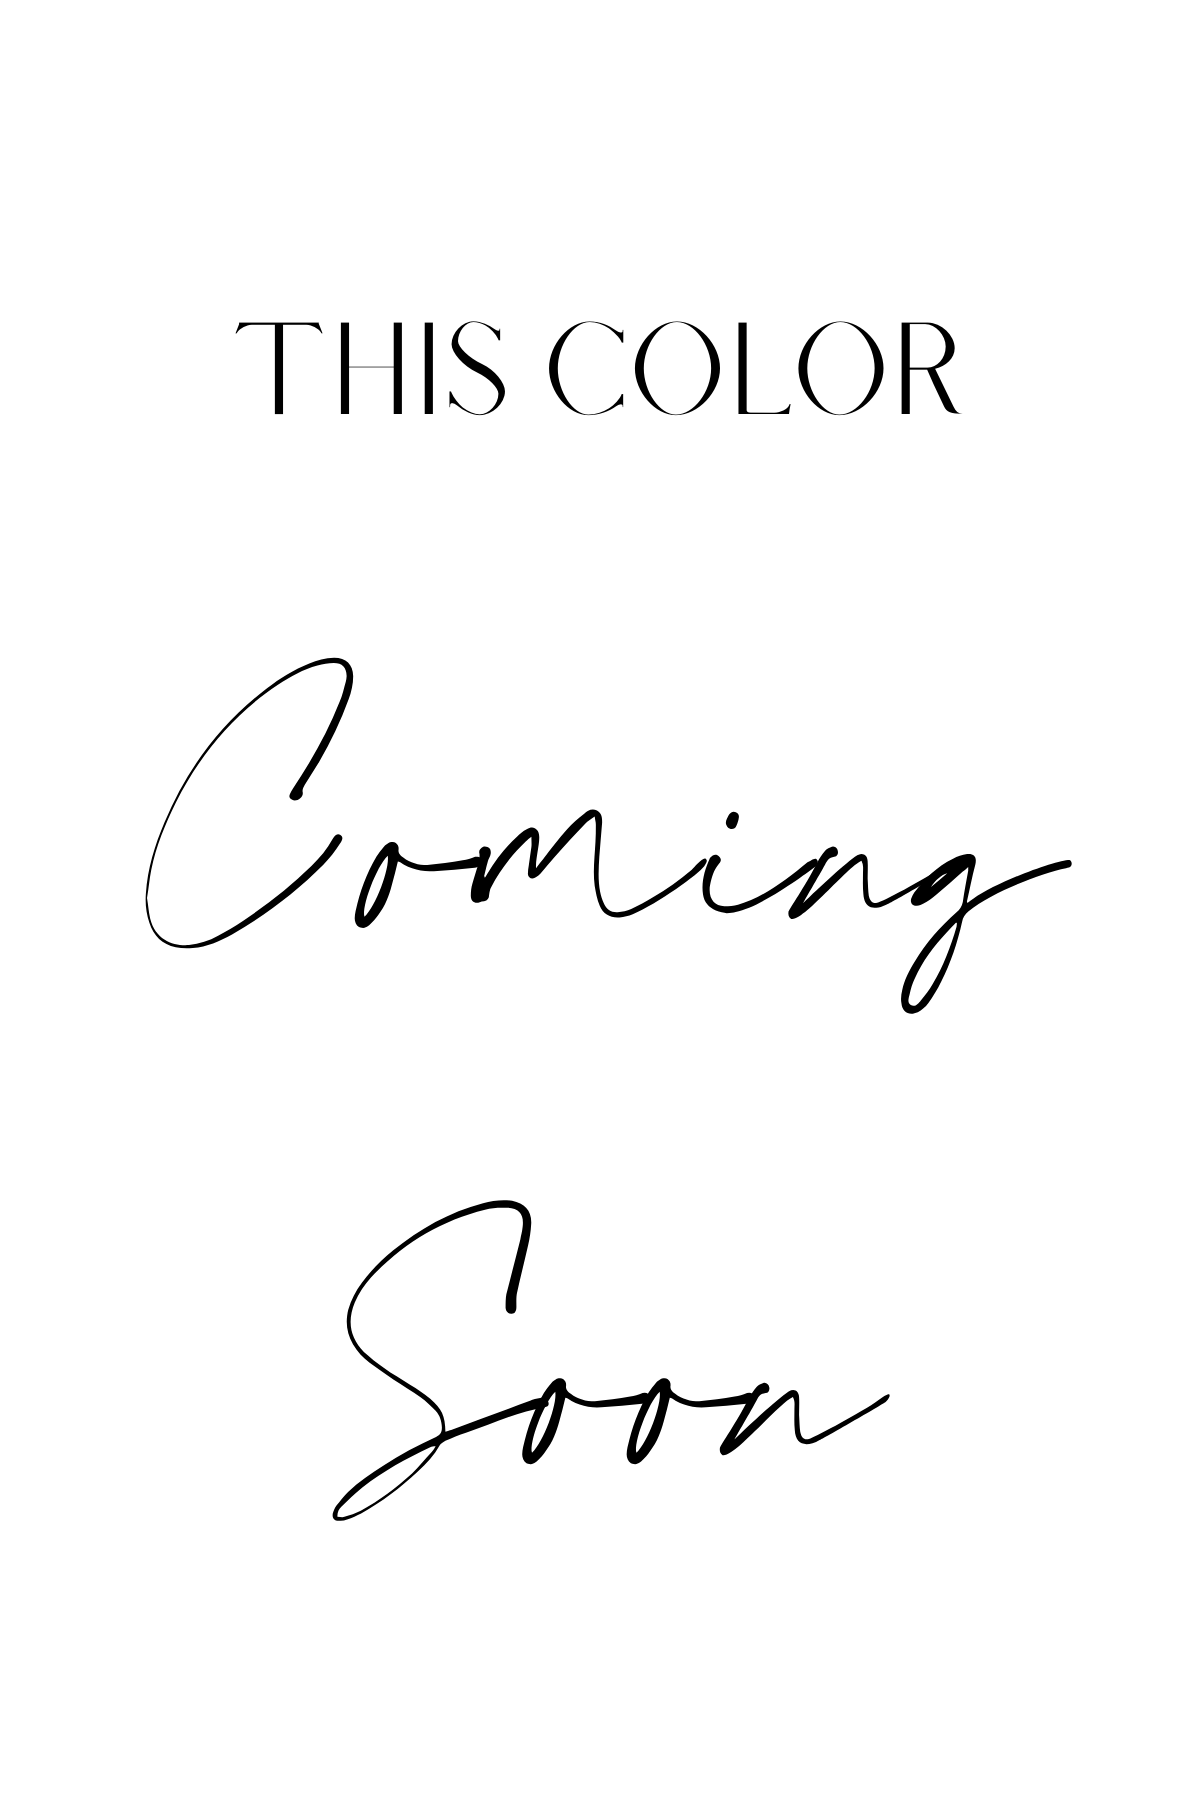 This Color Is Coming Soon!